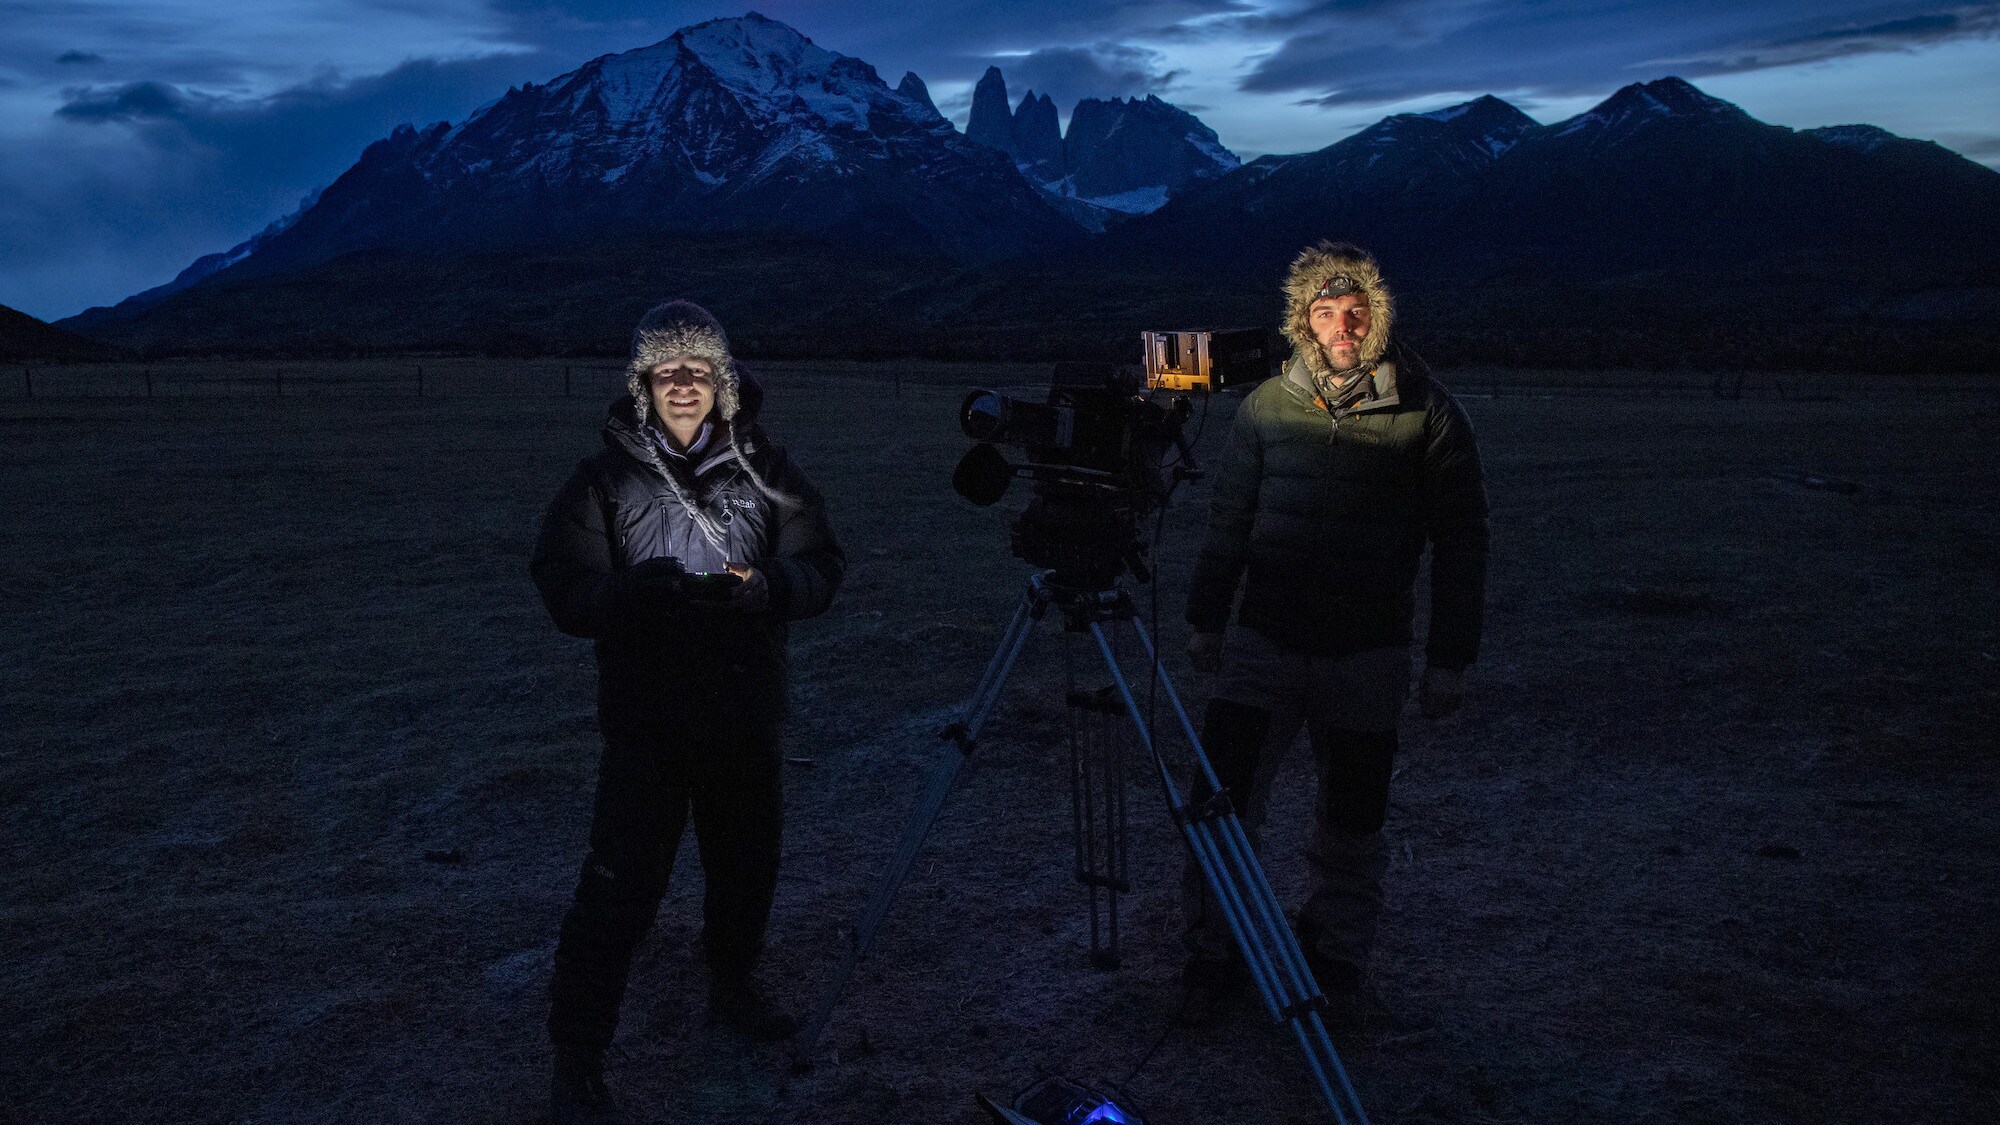 Bertie Gregory and Sam Stewart standing with camera in front of the mountains.  (National Geographic for Disney+/Bertie Gregory)